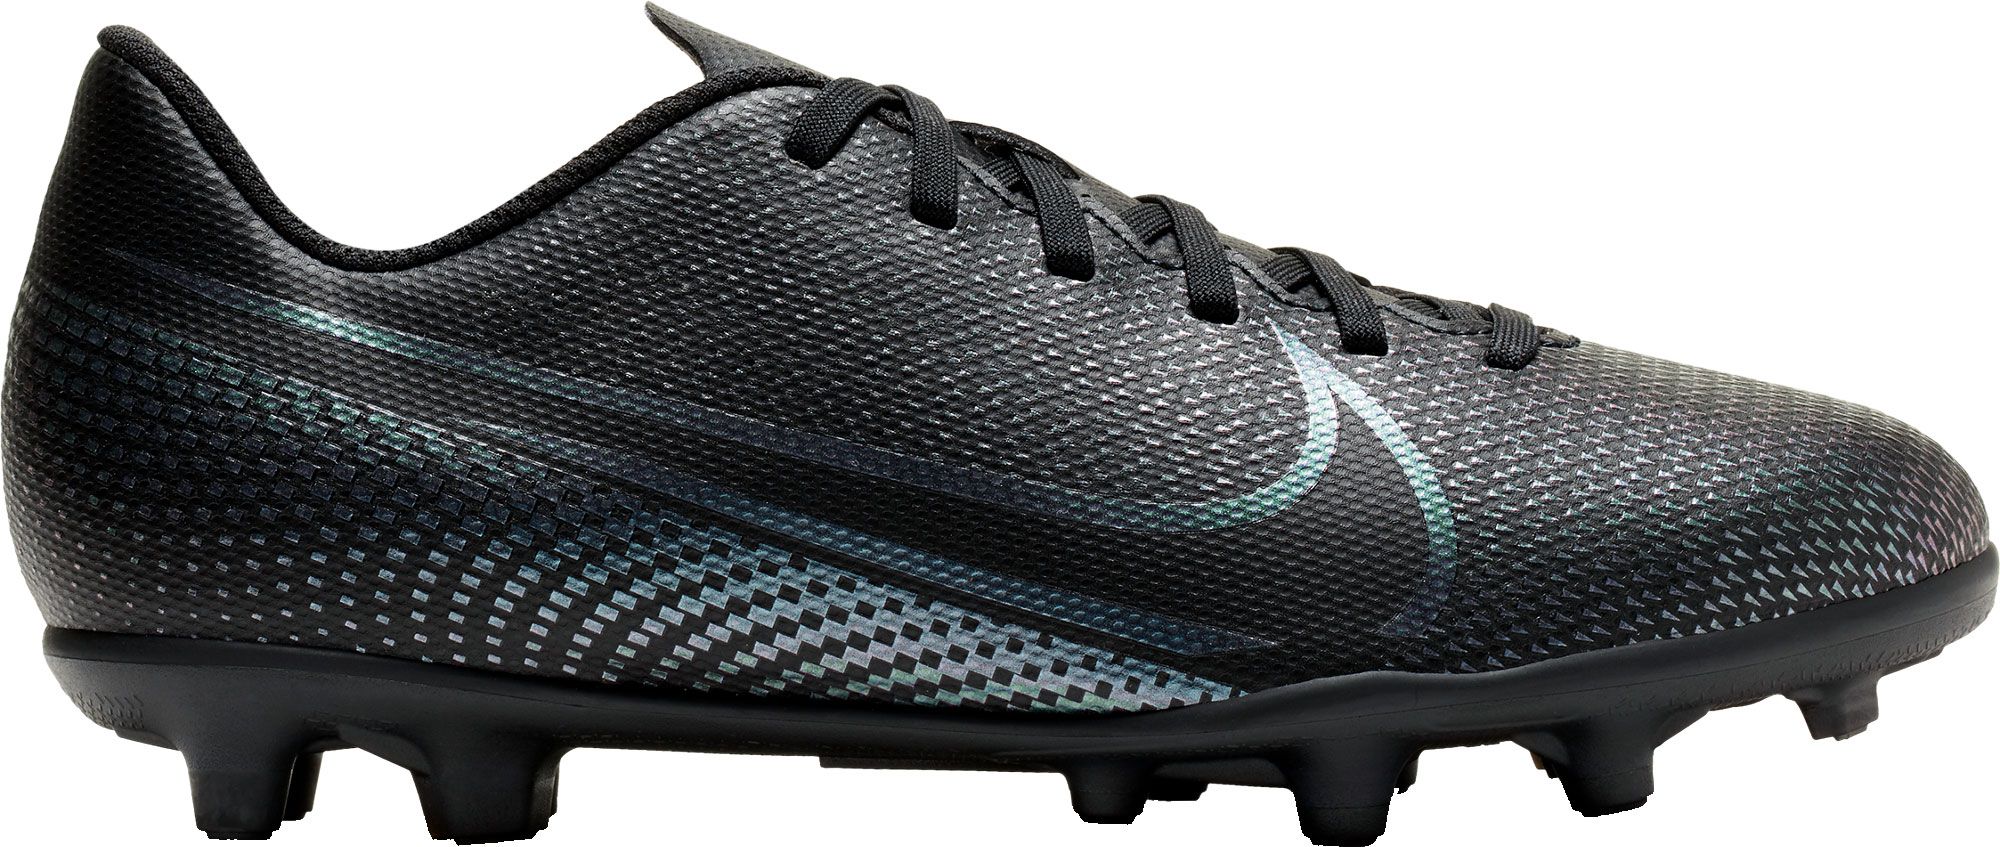 Soccer Cleats | Best Price Guarantee at DICK'S